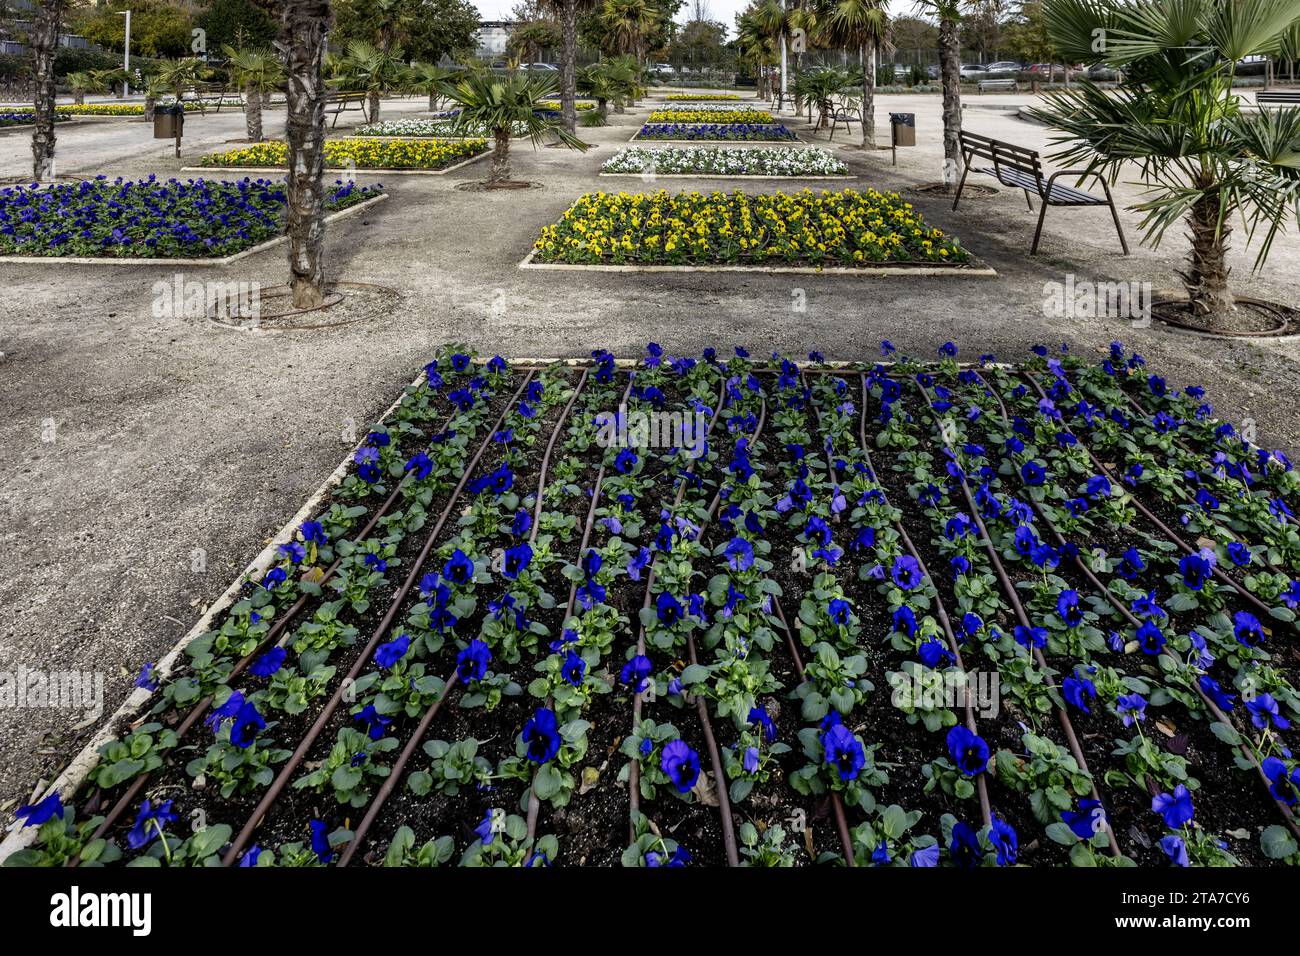 flower beds of different colors with controlled irrigation tubes Stock Photo